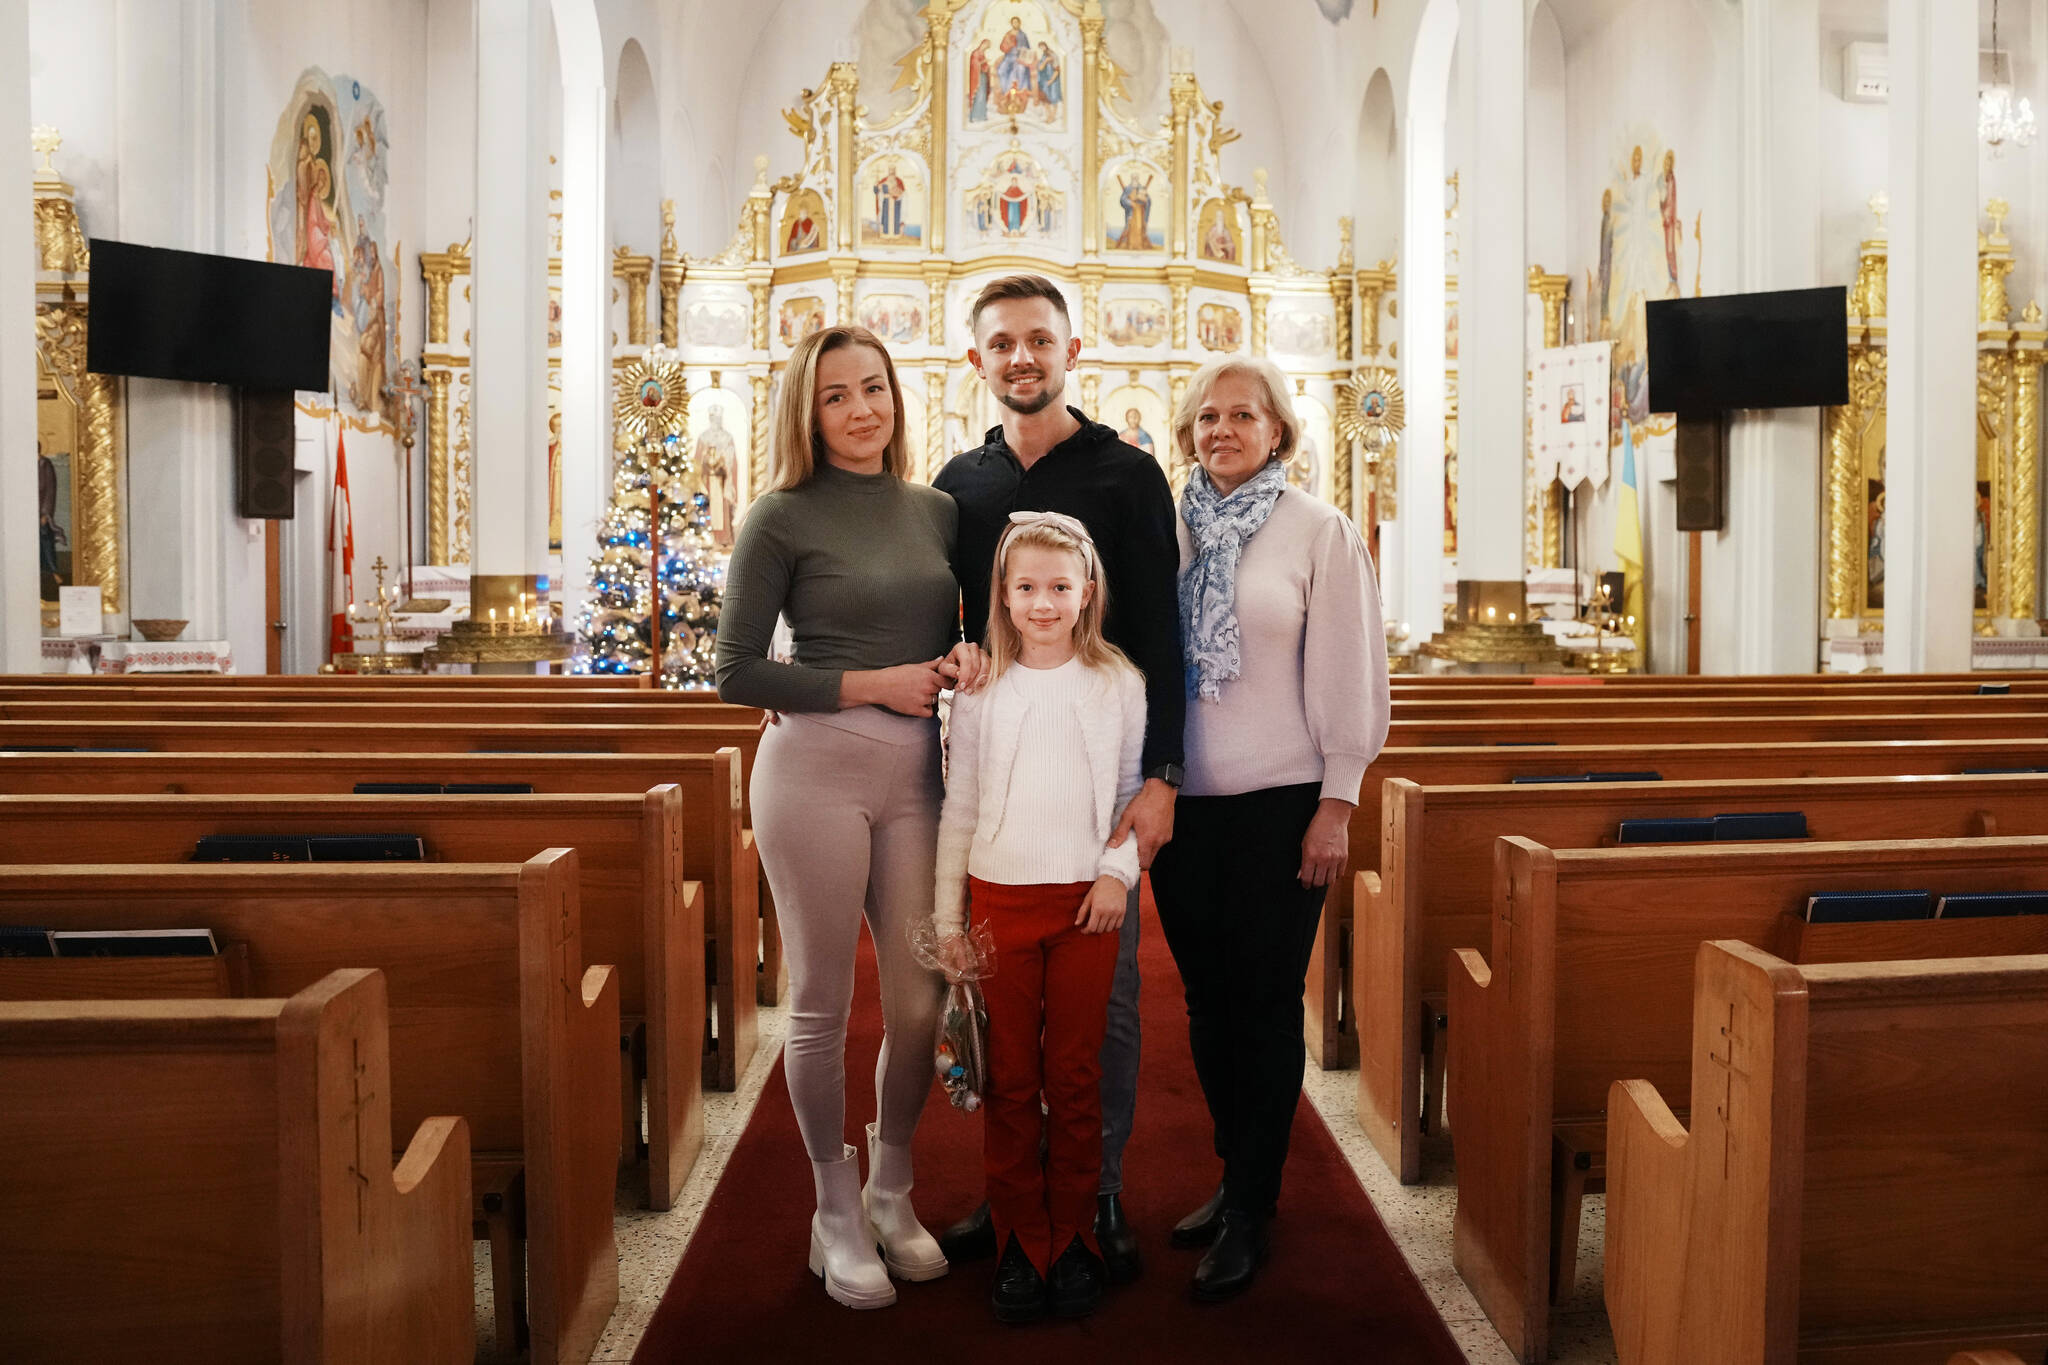 Vitali Hrechka poses for a photo with his wife Evelina, daughter Emiliia, and mother Hanna, after the St. Nicholas Day celebration at St. Demetrius Ukrainian Orthodox Church in Toronto on Sunday, Dec. 18, 2022. The family recently arrived in Canada after leaving their home in Ukraine’s Transkarpathia region. THE CANADIAN PRESS/Chris Young